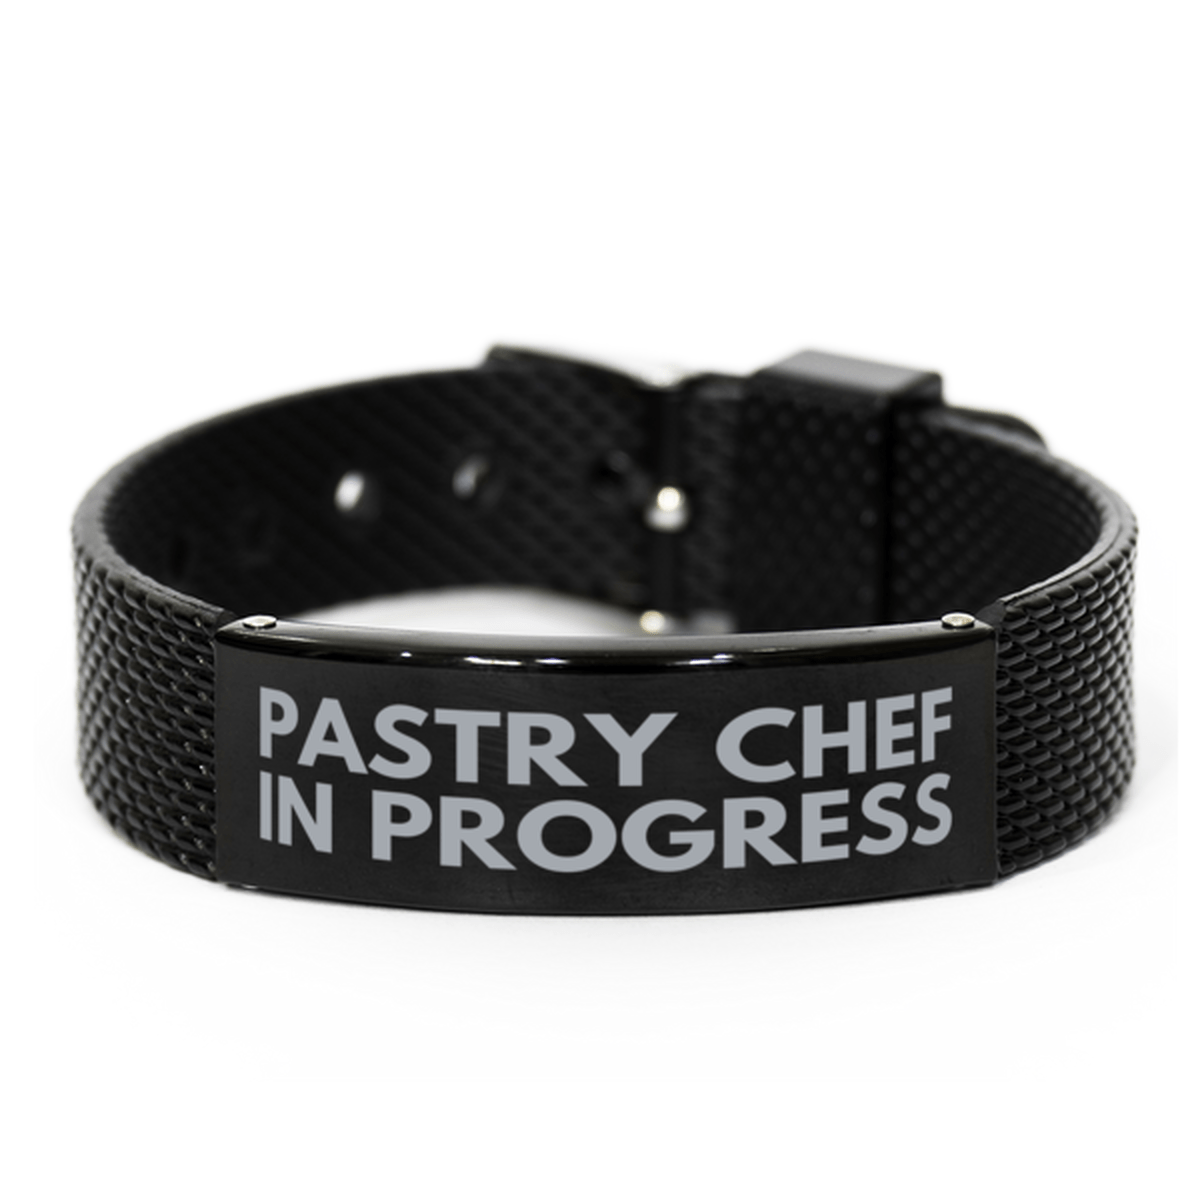 Inspirational Pastry Chef Black Shark Mesh Bracelet, Pastry Chef In Progress, Best Graduation Gifts for Students